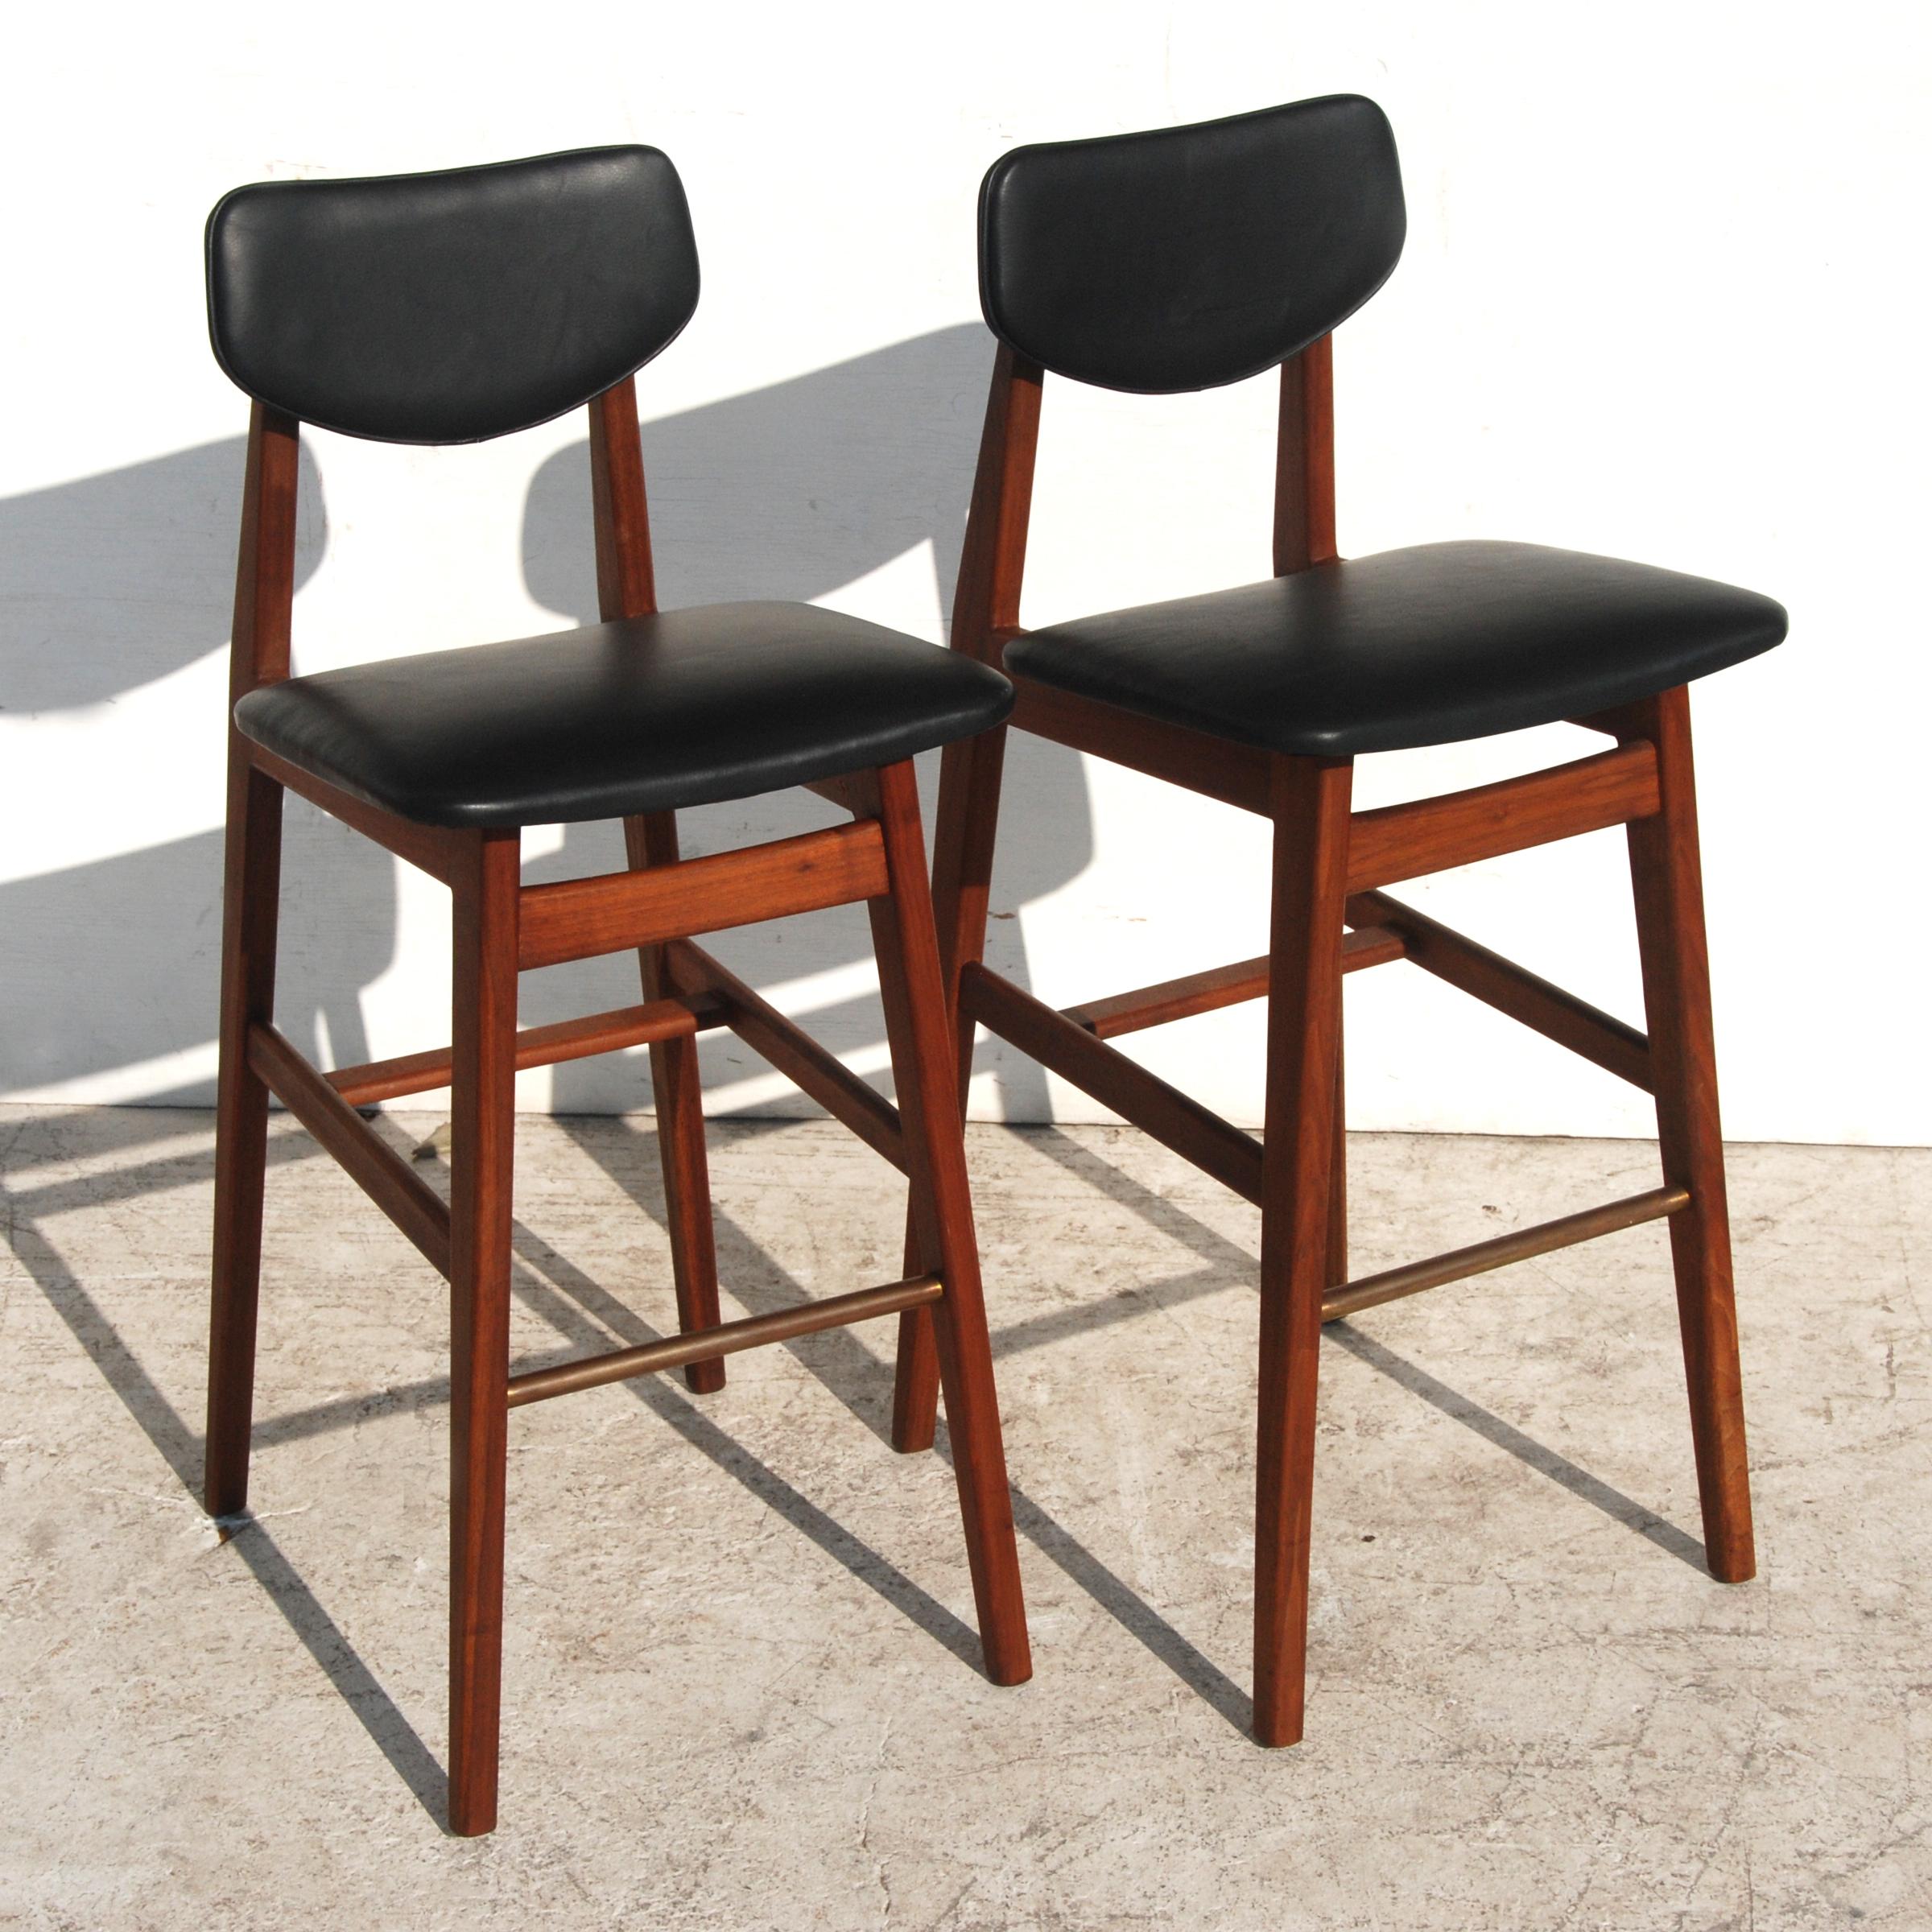 Mid-Century Modern Pair of Rare Jens Risom Stools in Leather